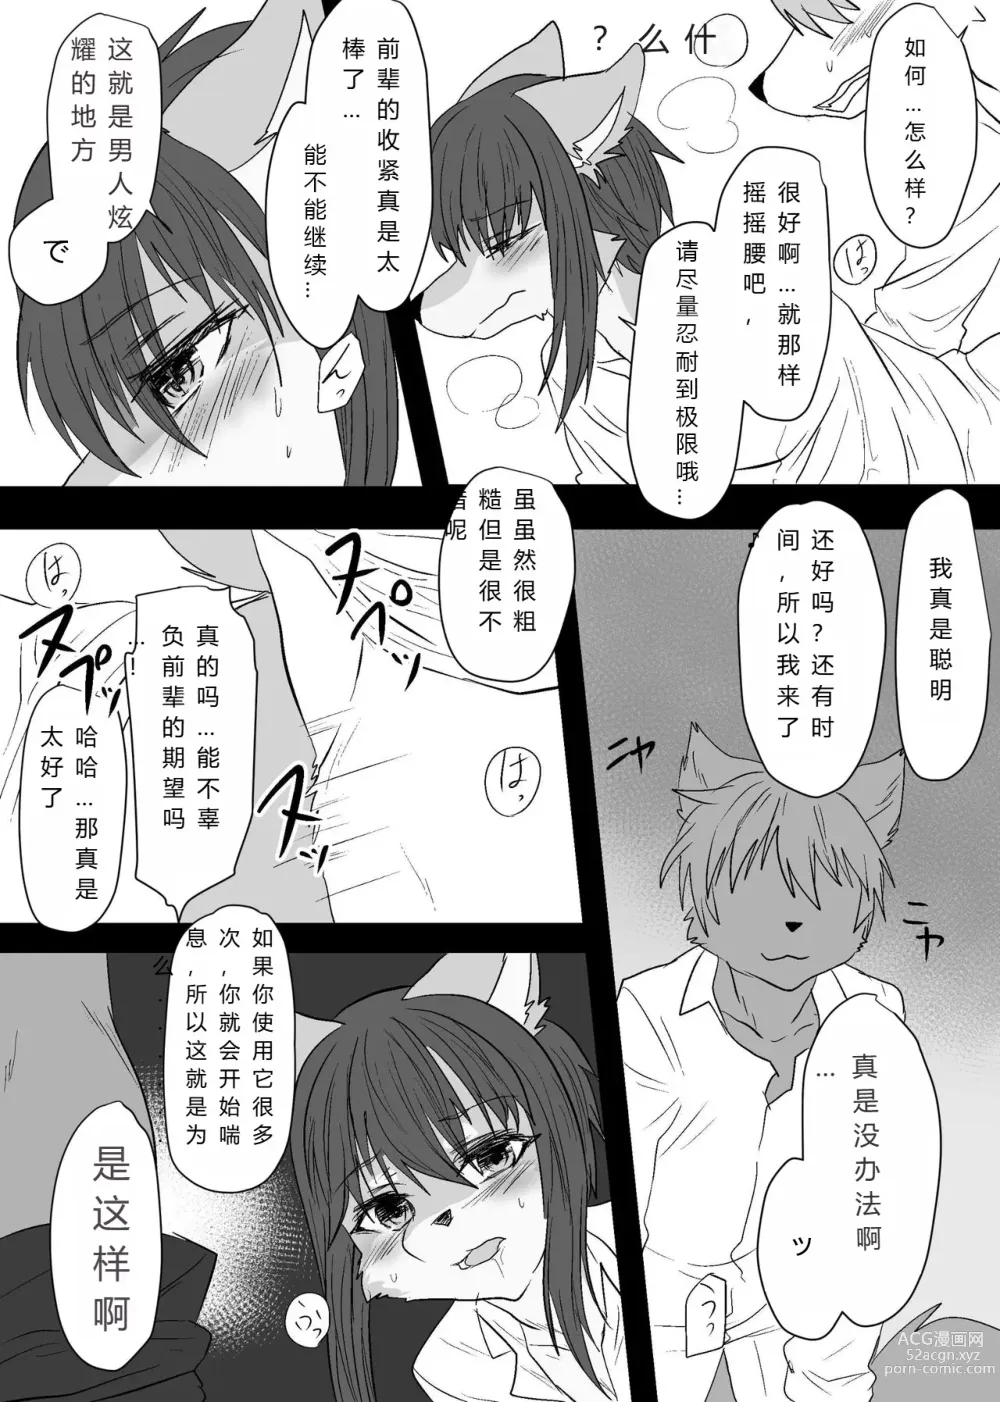 Page 10 of doujinshi 我们要上班吗？